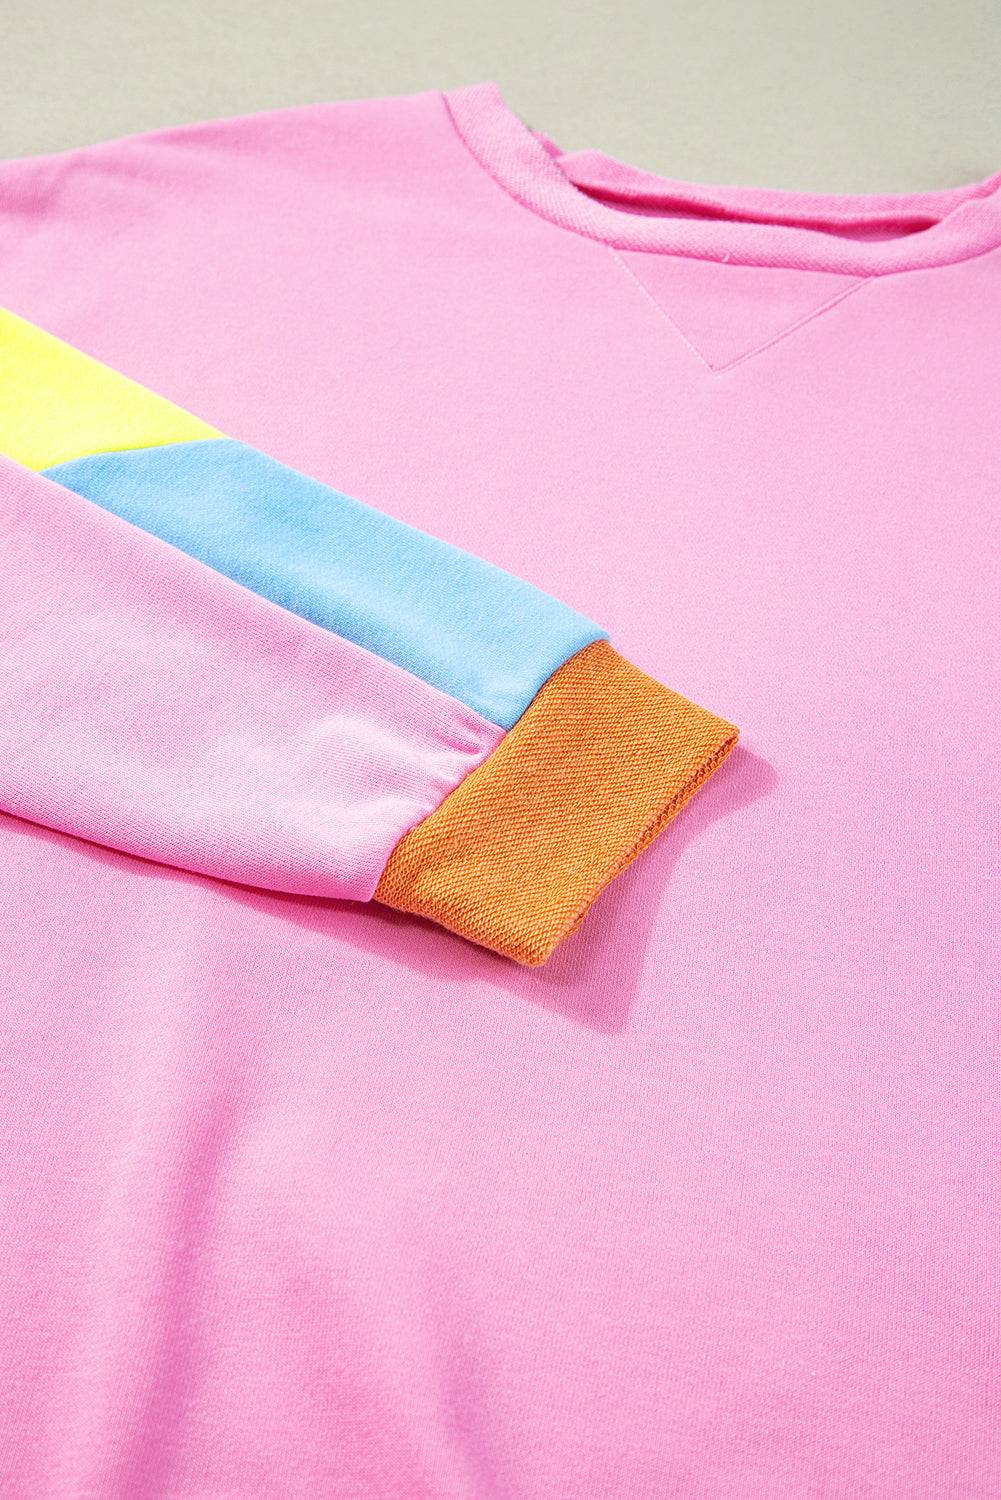 a pink shirt with a yellow and blue strip on it